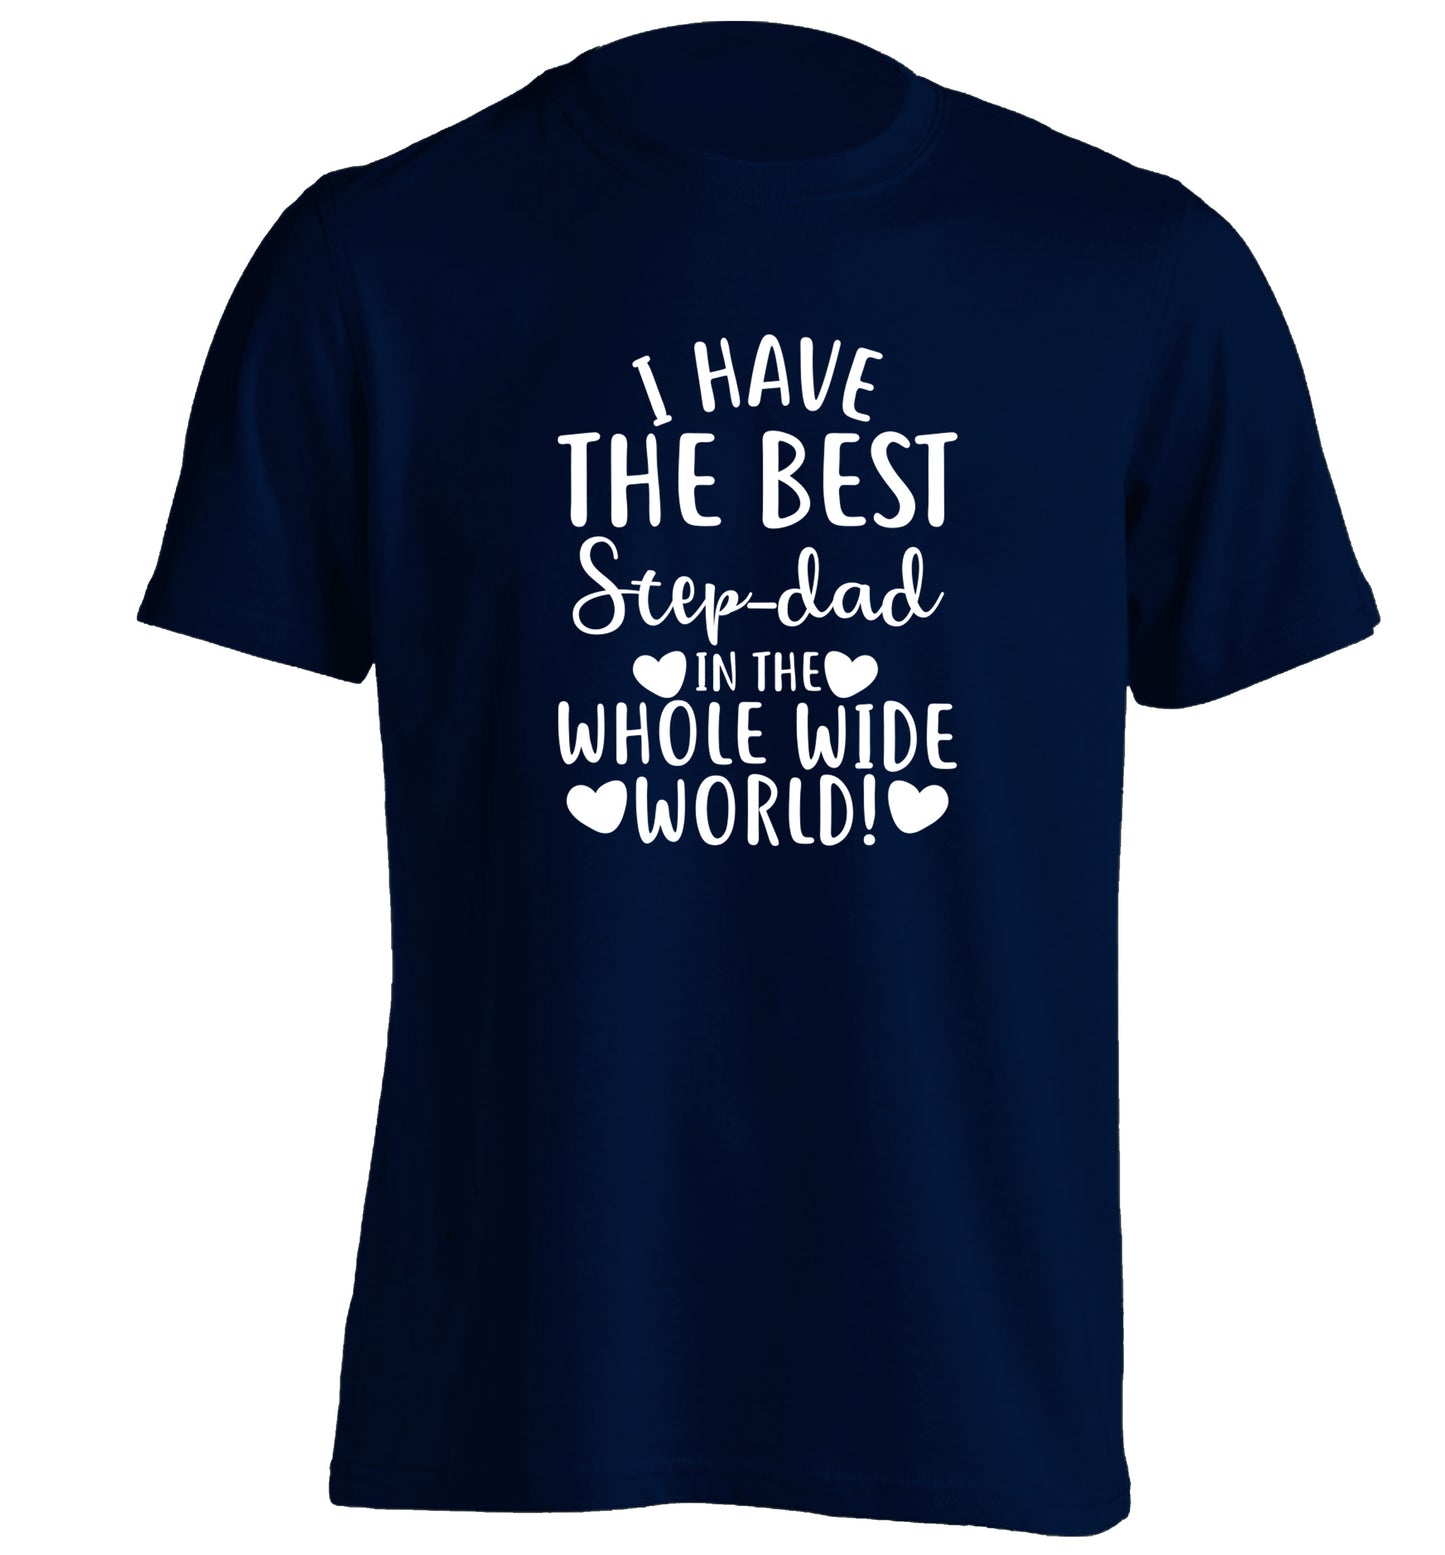 I have the best step-dad in the whole wide world! adults unisex navy Tshirt 2XL